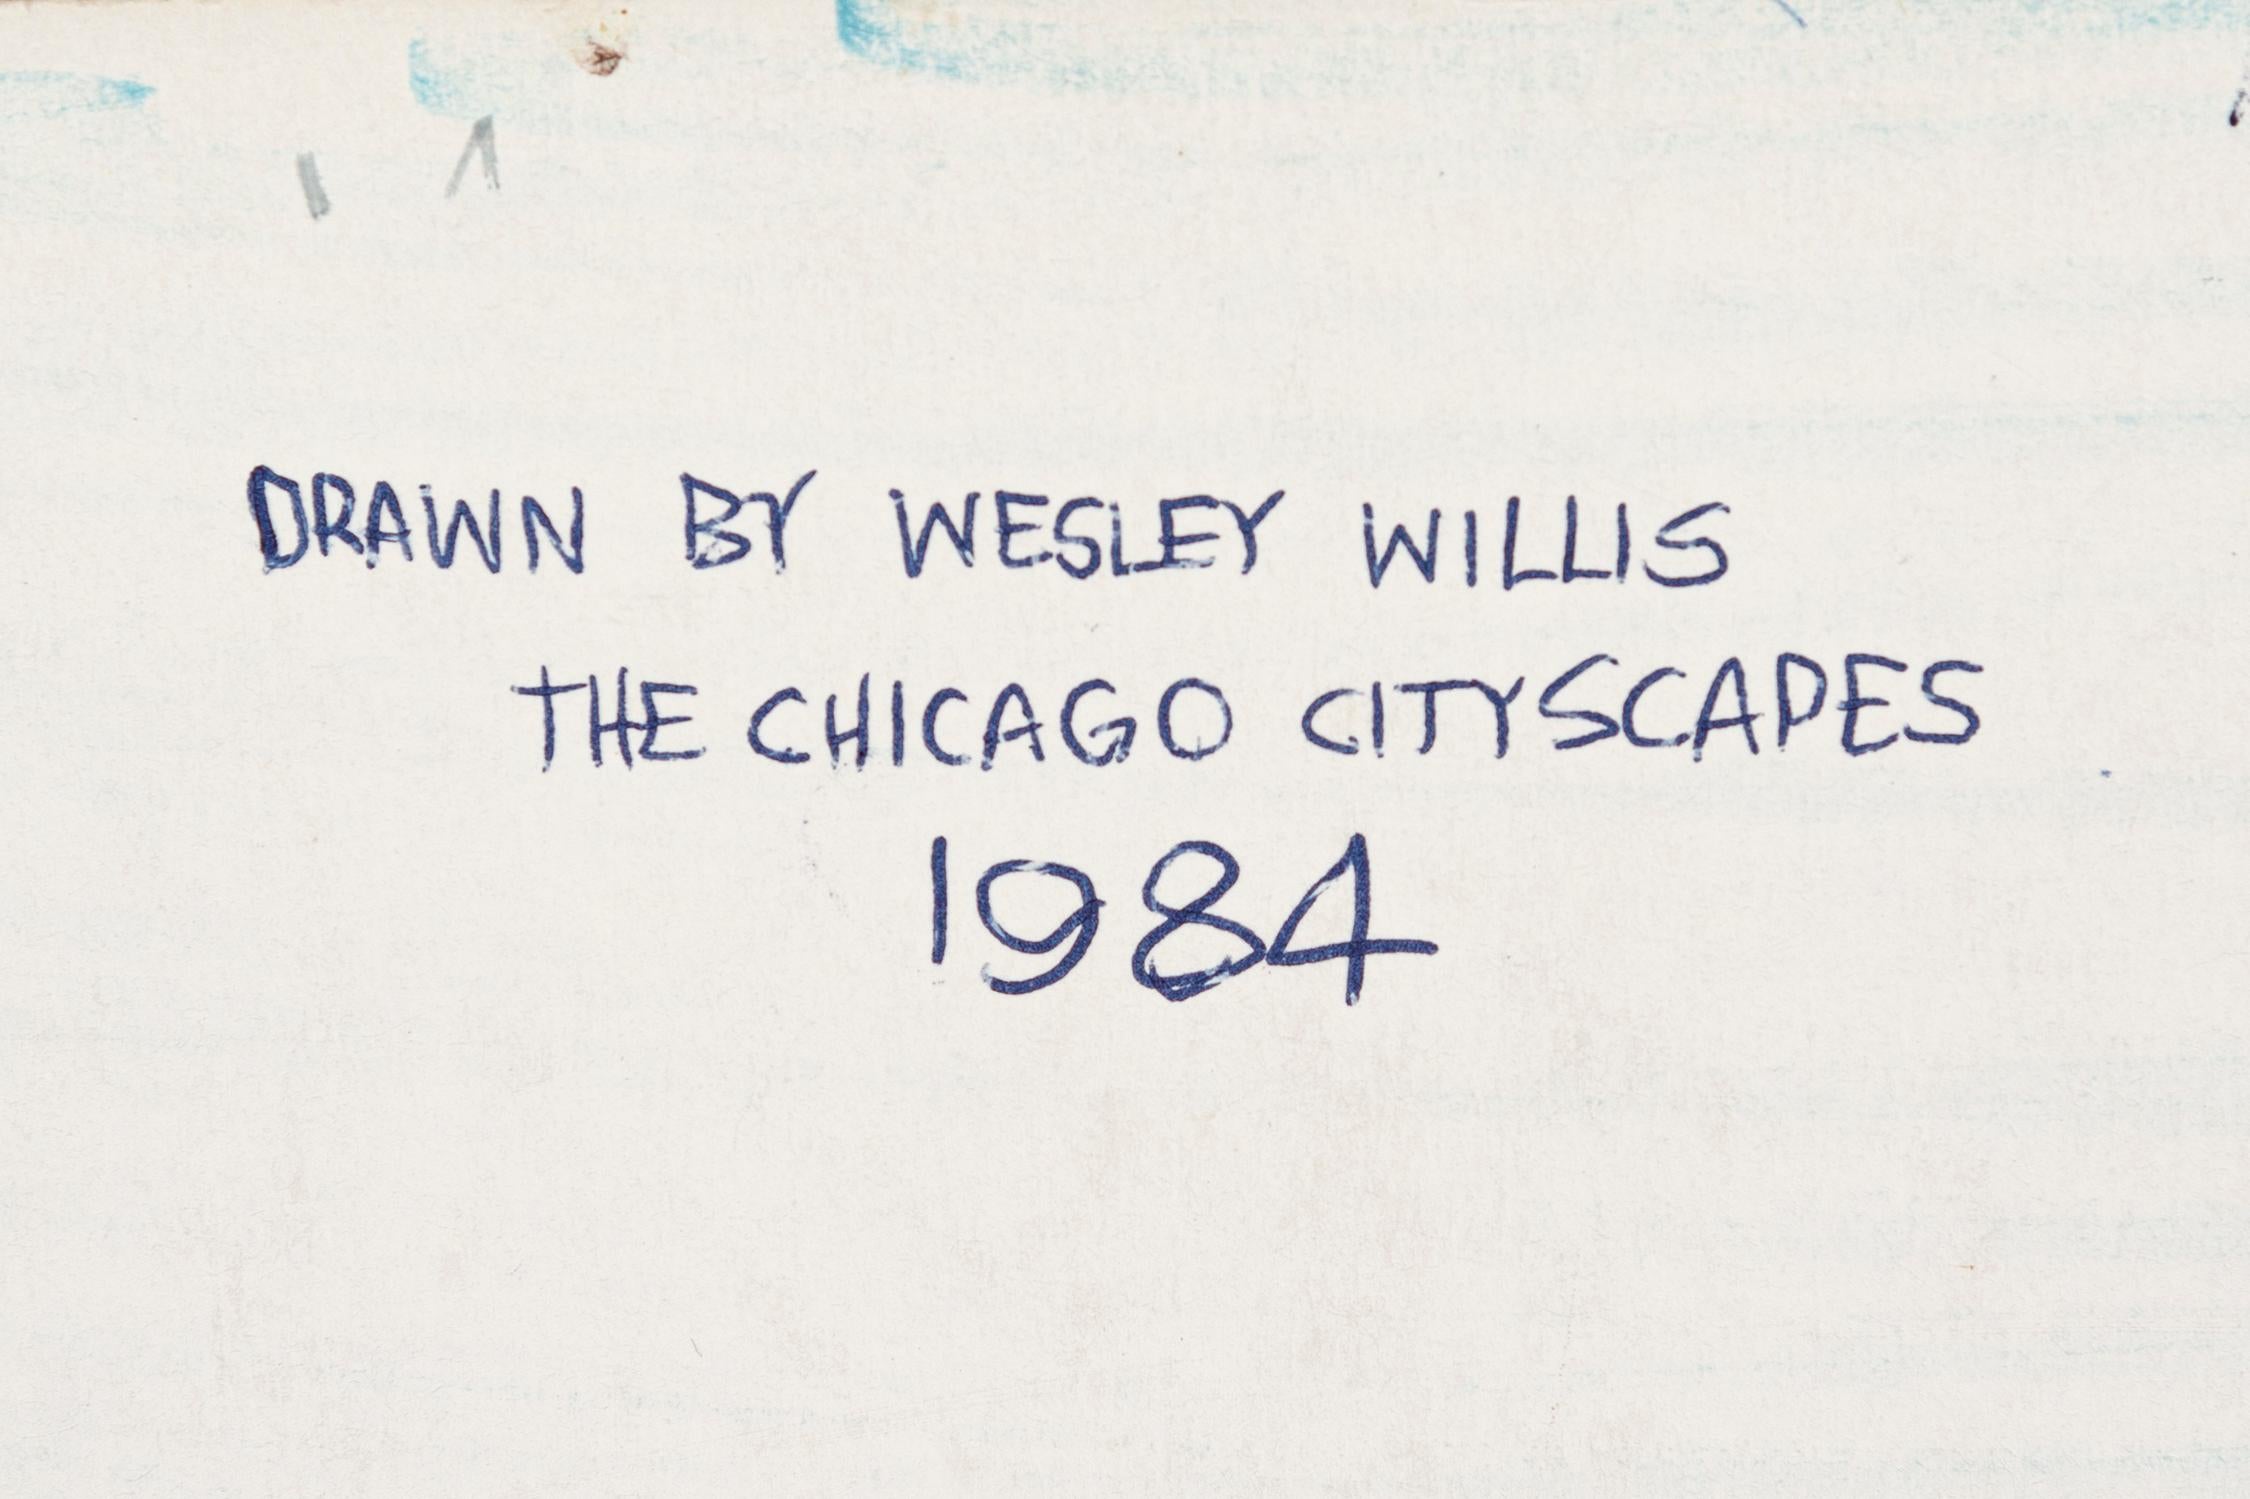 Chicago Cityscapes - Contemporary Art by Wesley Willis